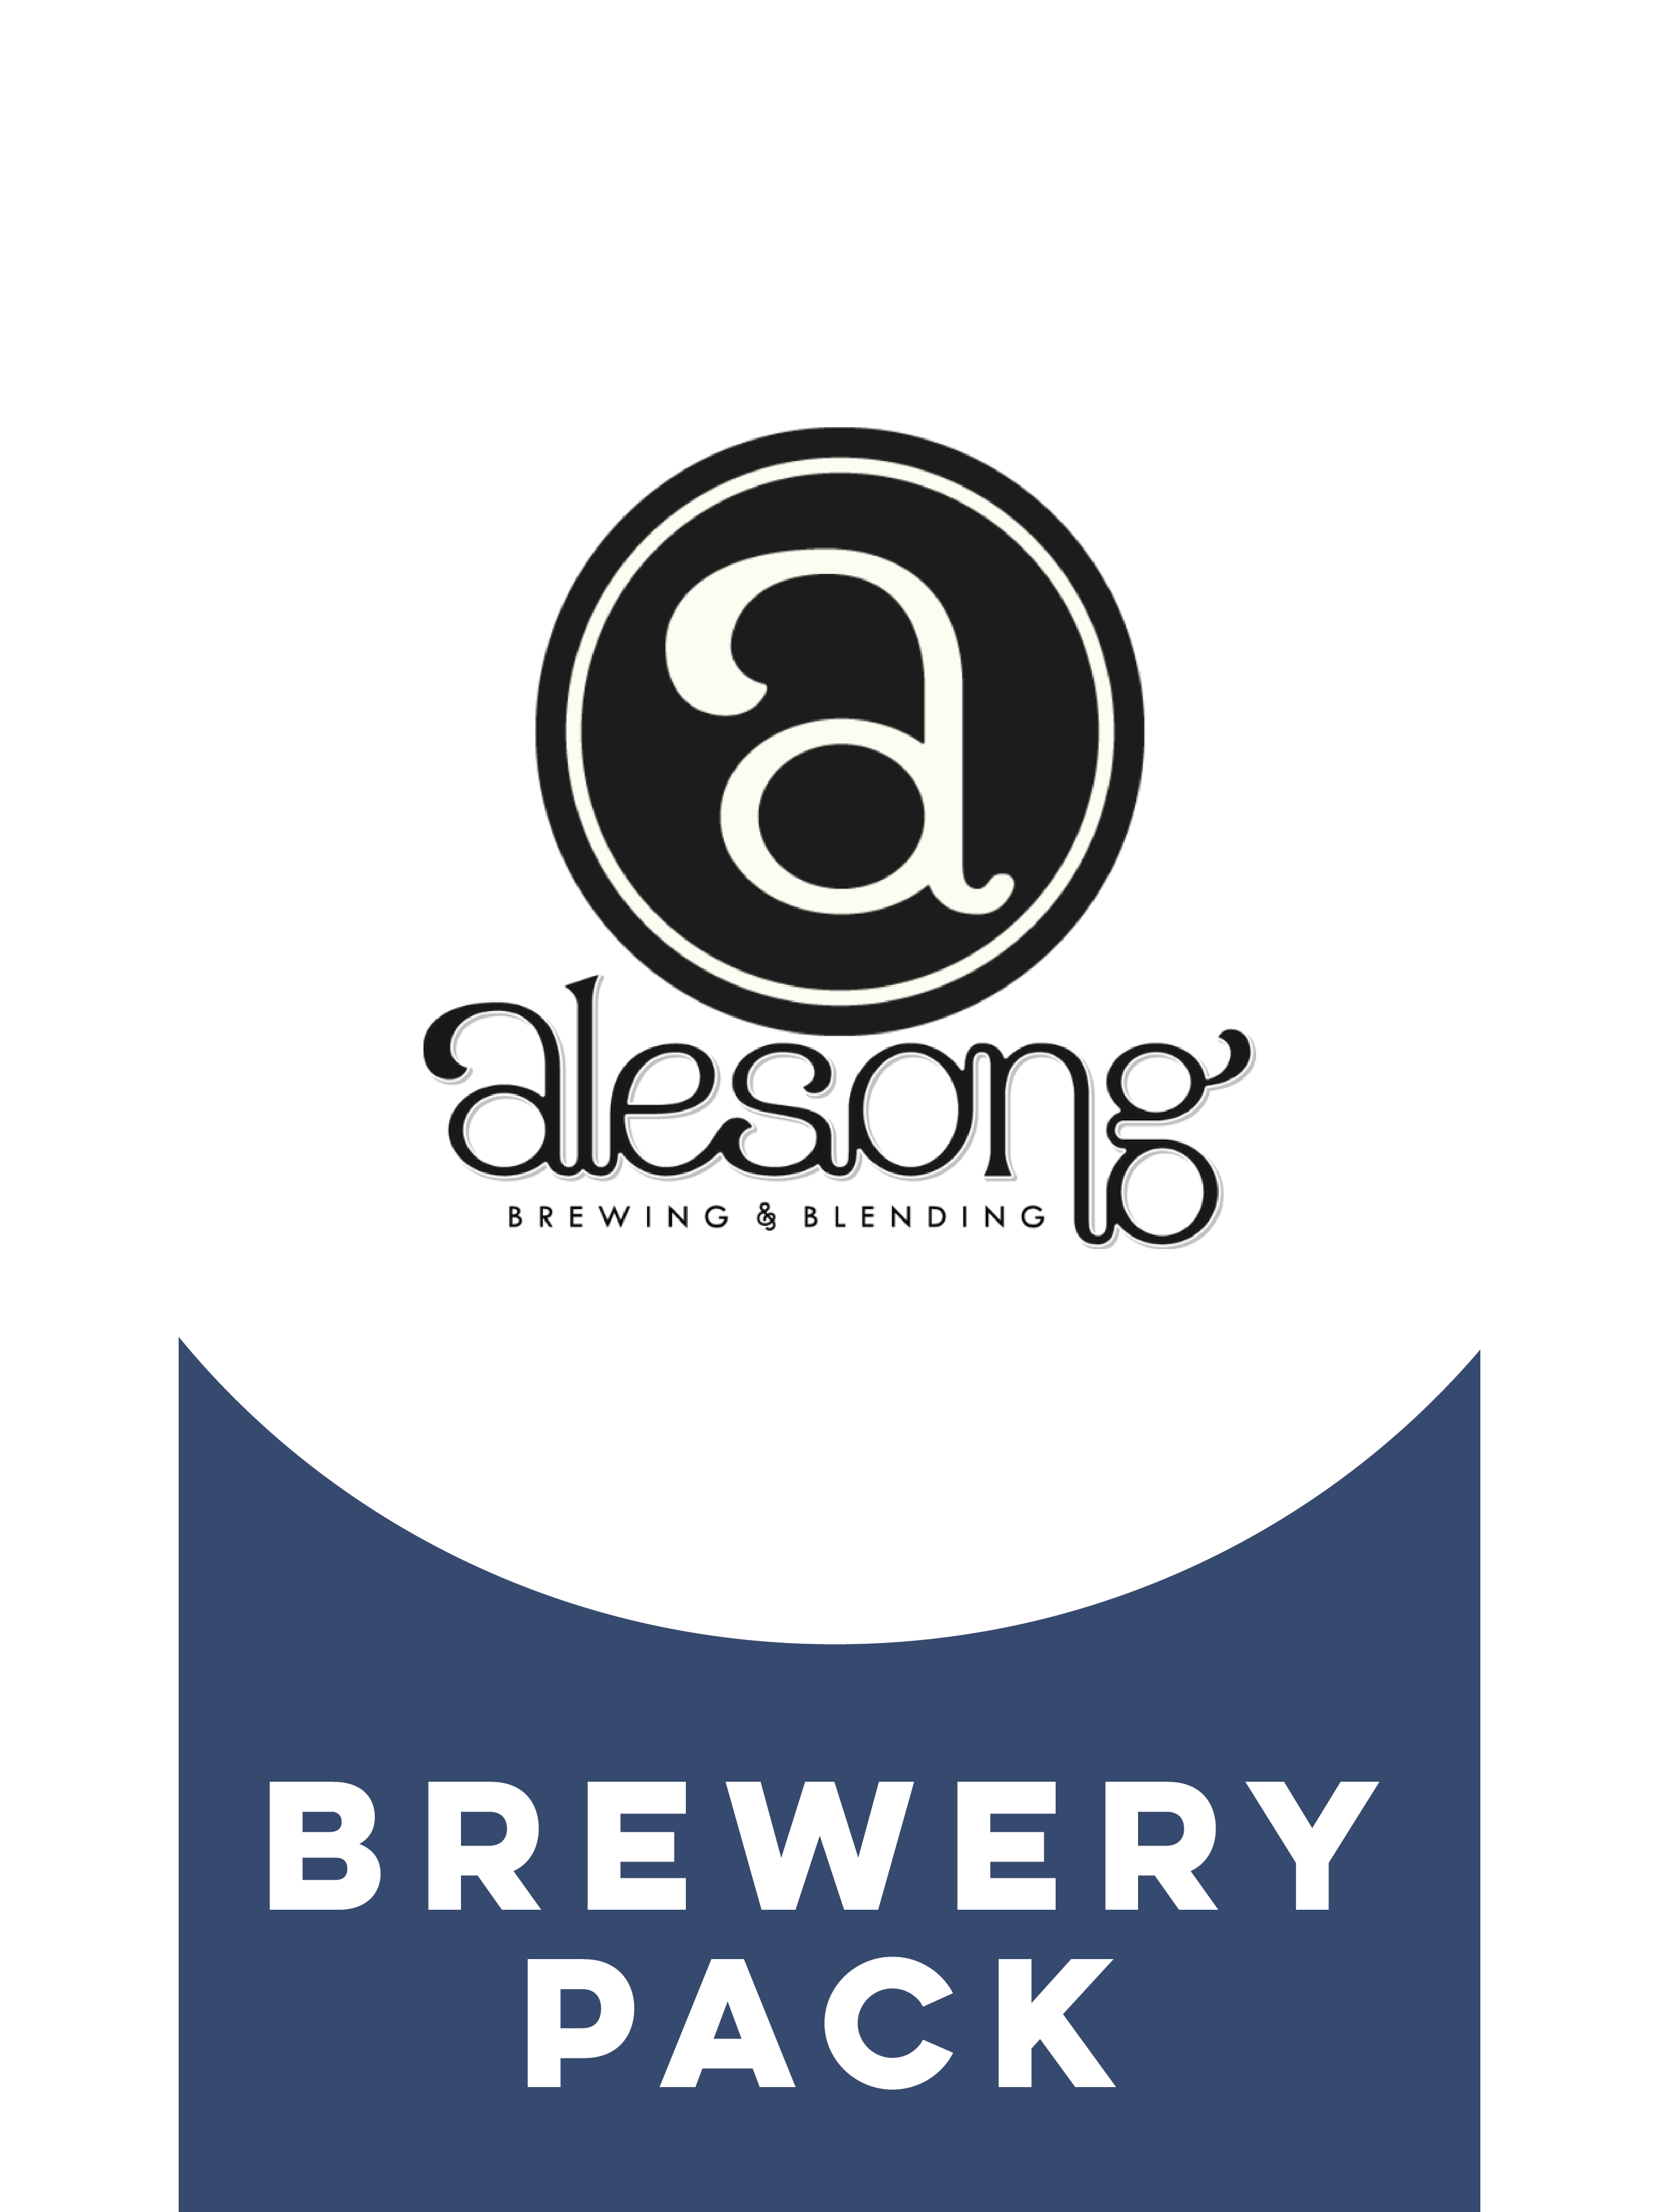 -Alesong- Alesong Brewery Pack-Packs & Cases- Only @ Beer Republic - The best online beer store for American & Canadian craft beer - Buy beer online from the USA and Canada - Bier online kopen - Amerikaans bier kopen - Craft beer store - Craft beer kopen - Amerikanisch bier kaufen - Bier online kaufen - Acheter biere online - IPA - Stout - Porter - New England IPA - Hazy IPA - Imperial Stout - Barrel Aged - Barrel Aged Imperial Stout - Brown - Dark beer - Blond - Blonde - Pilsner - Lager - Wheat - Weizen - 